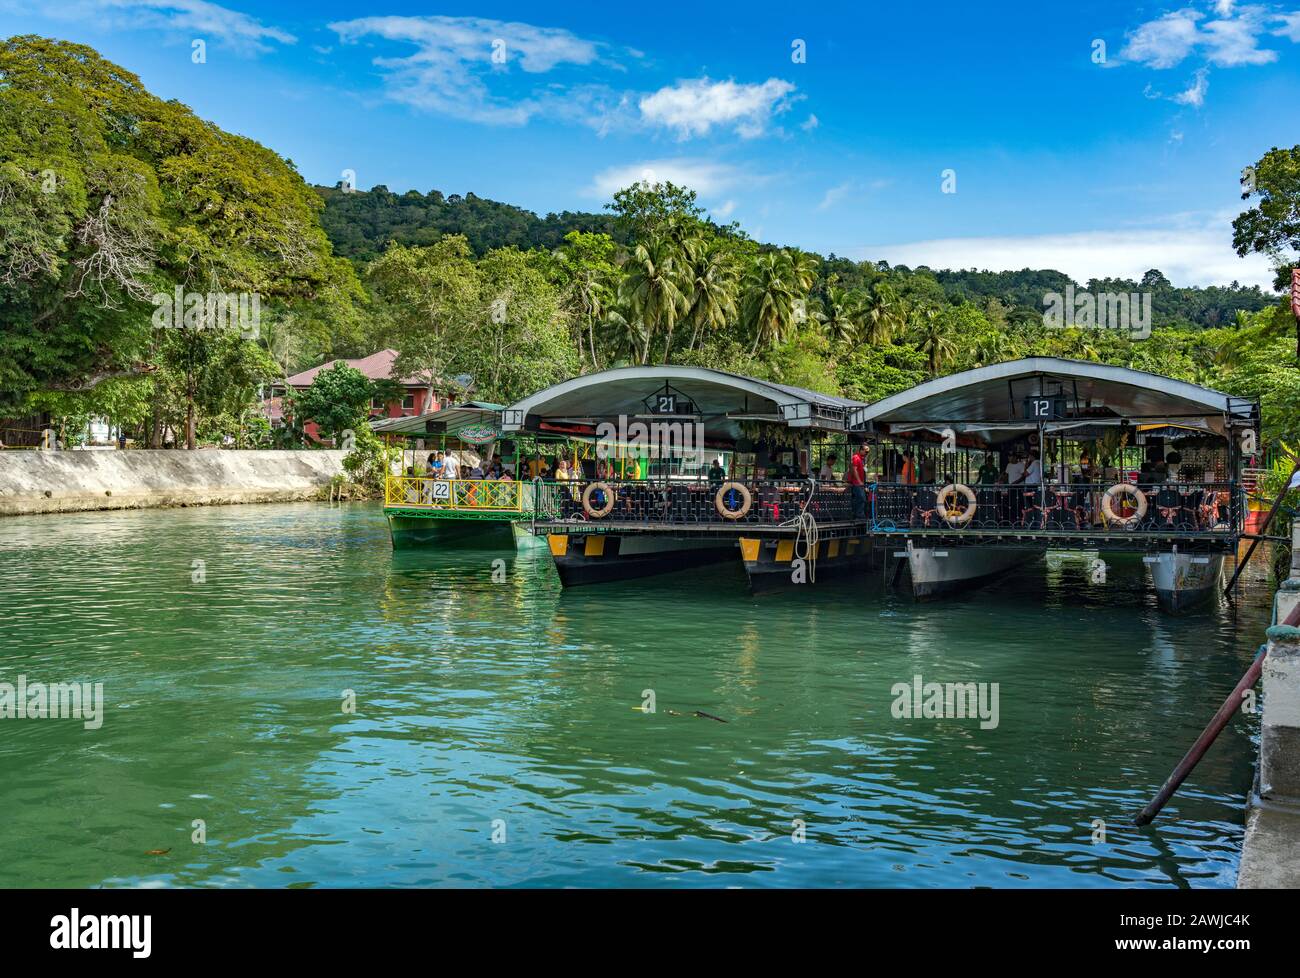 Cruise ship on the  Loboc River is a river in the Bohol province of the Philippines. It is one of the major tourist destinations of Bohol. Stock Photo